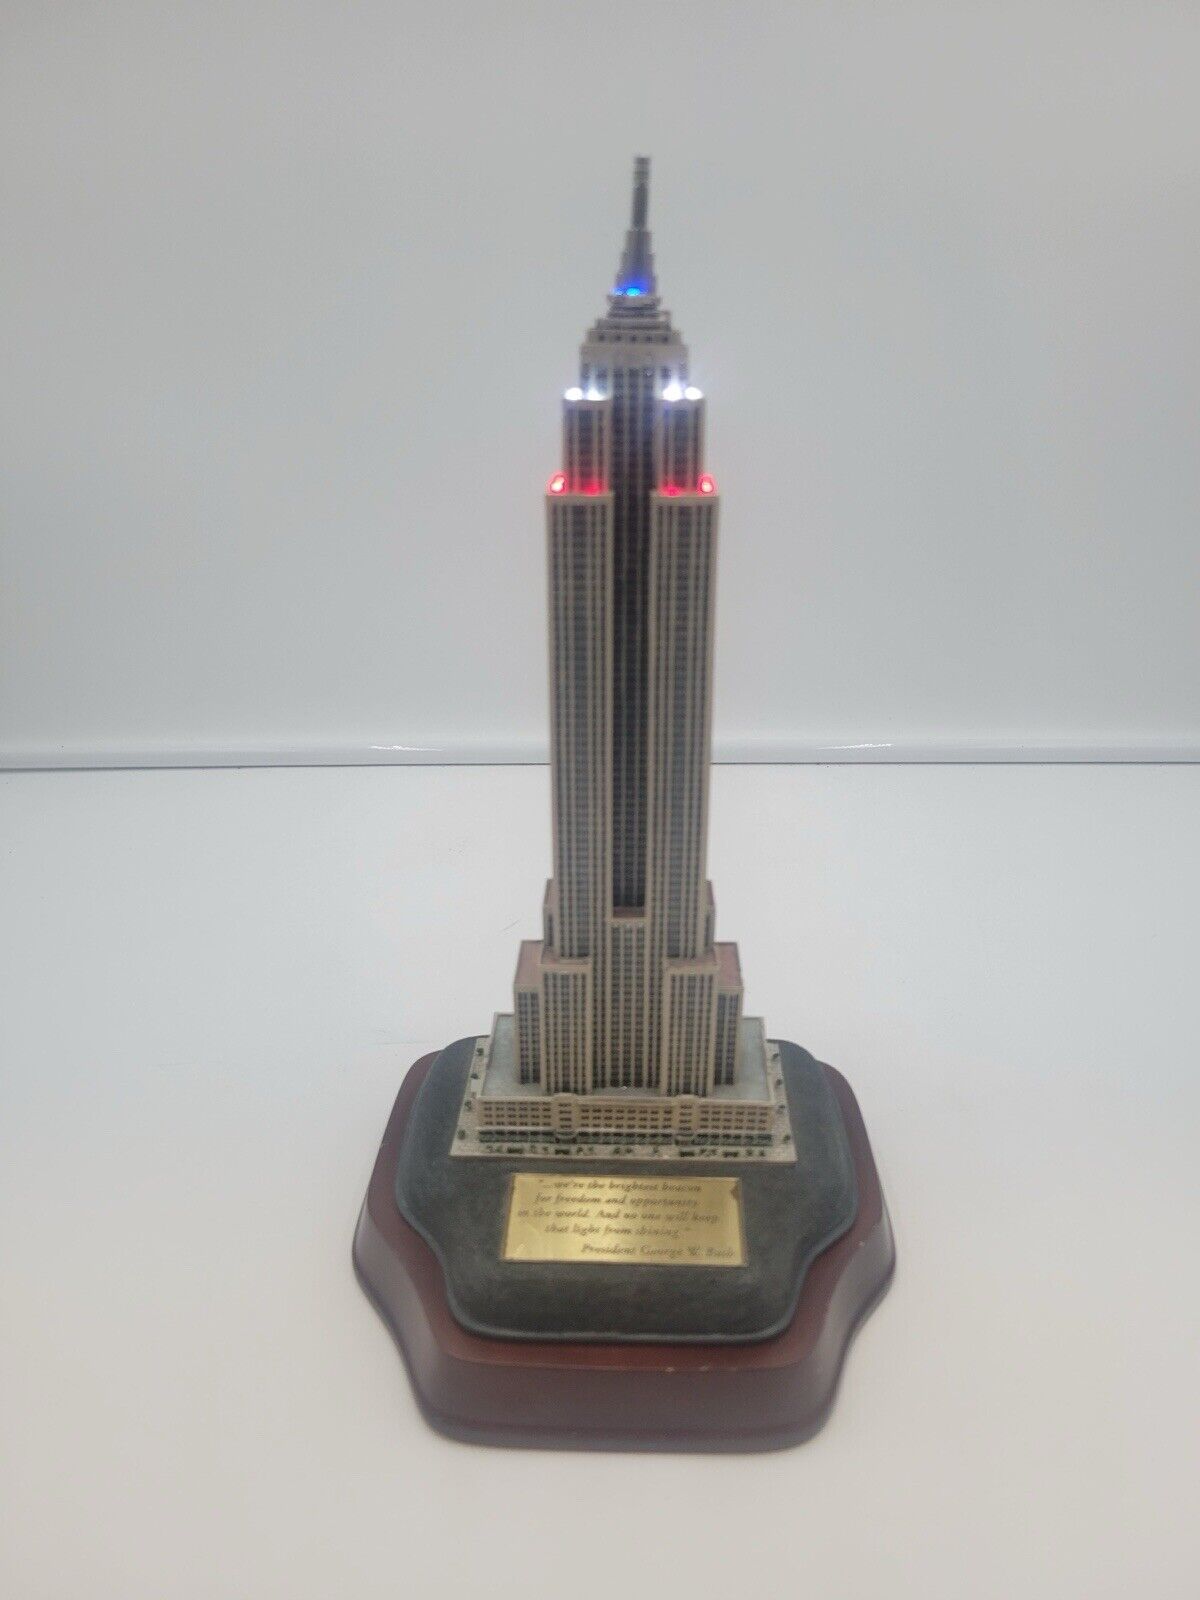 DANBURY MINT LIGHTED EMPIRE STATE BUILDING